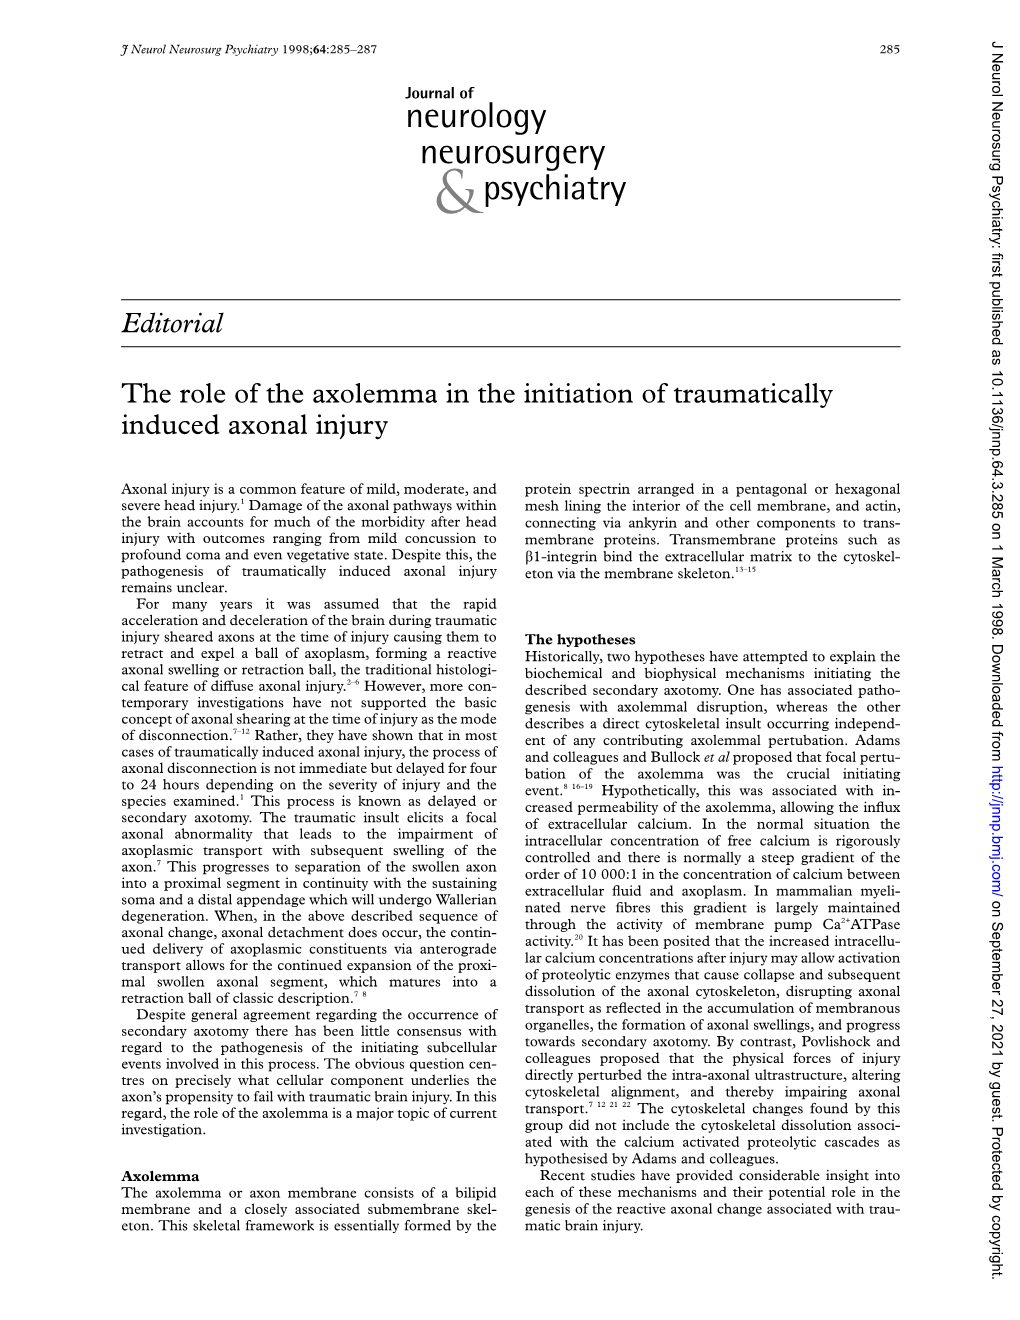 Editorial the Role of the Axolemma in the Initiation of Traumatically